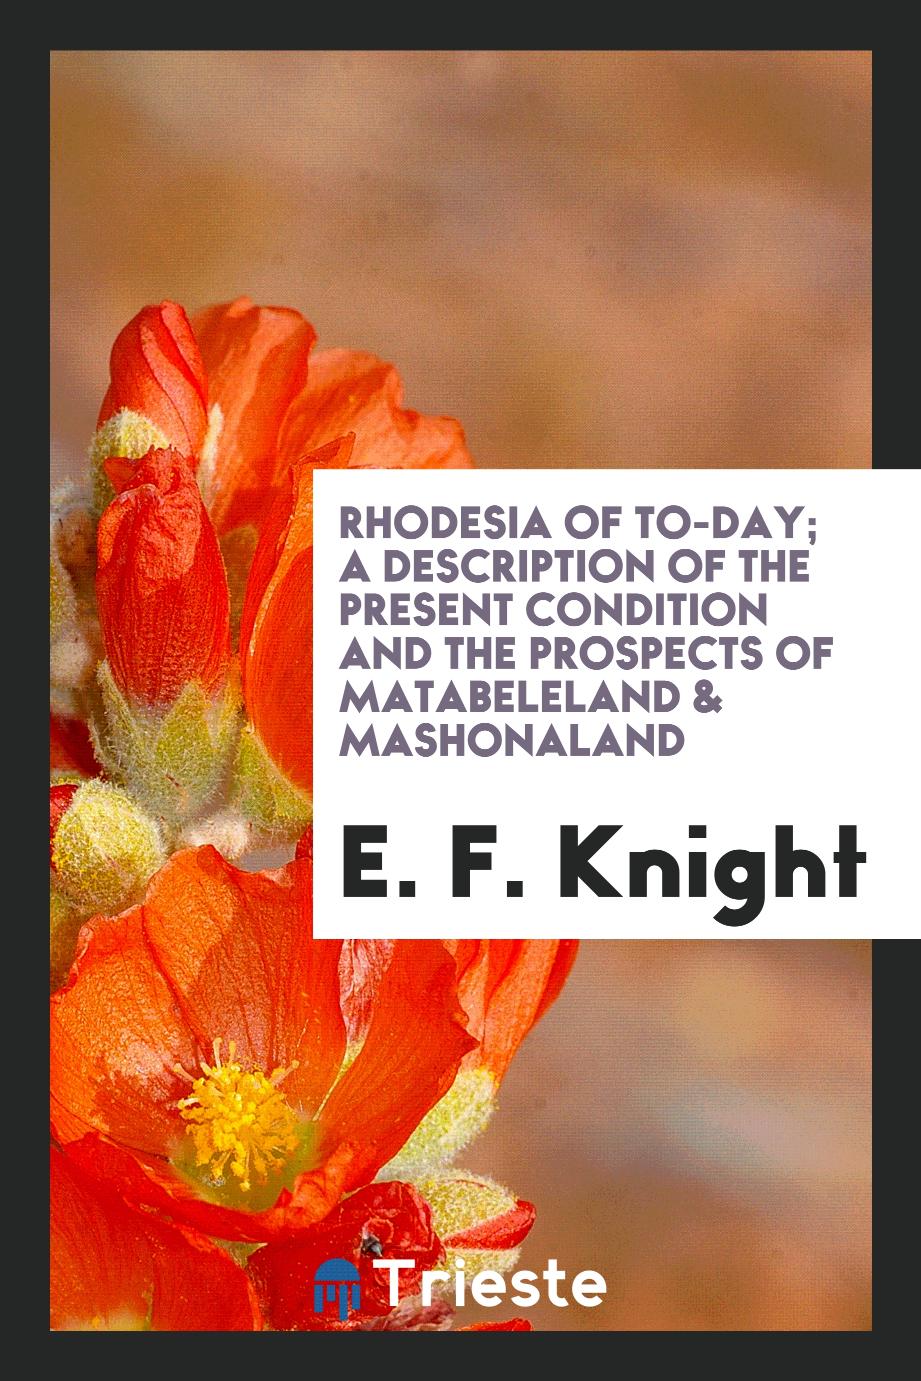 Rhodesia of To-Day; A Description of the Present Condition and the Prospects of Matabeleland & Mashonaland